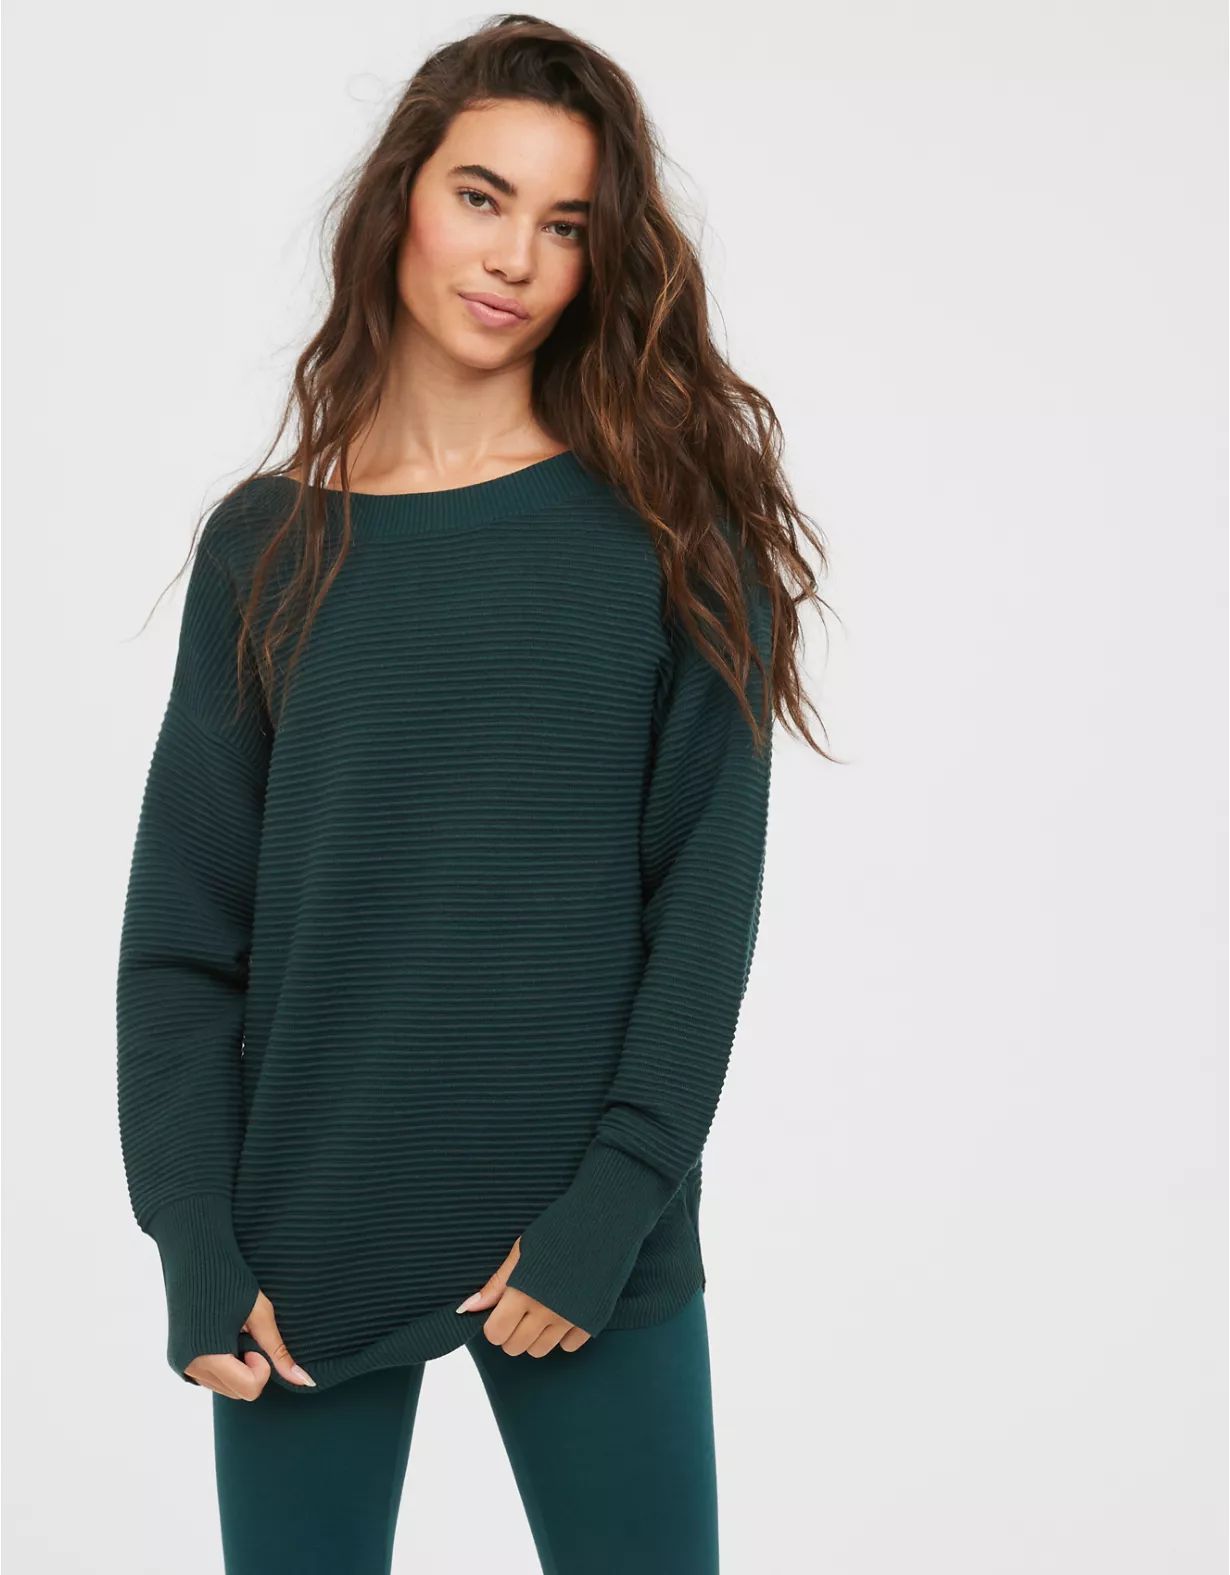 OFFLINE by Aerie Home Stretch Off The Shoulder Sweater | Aerie